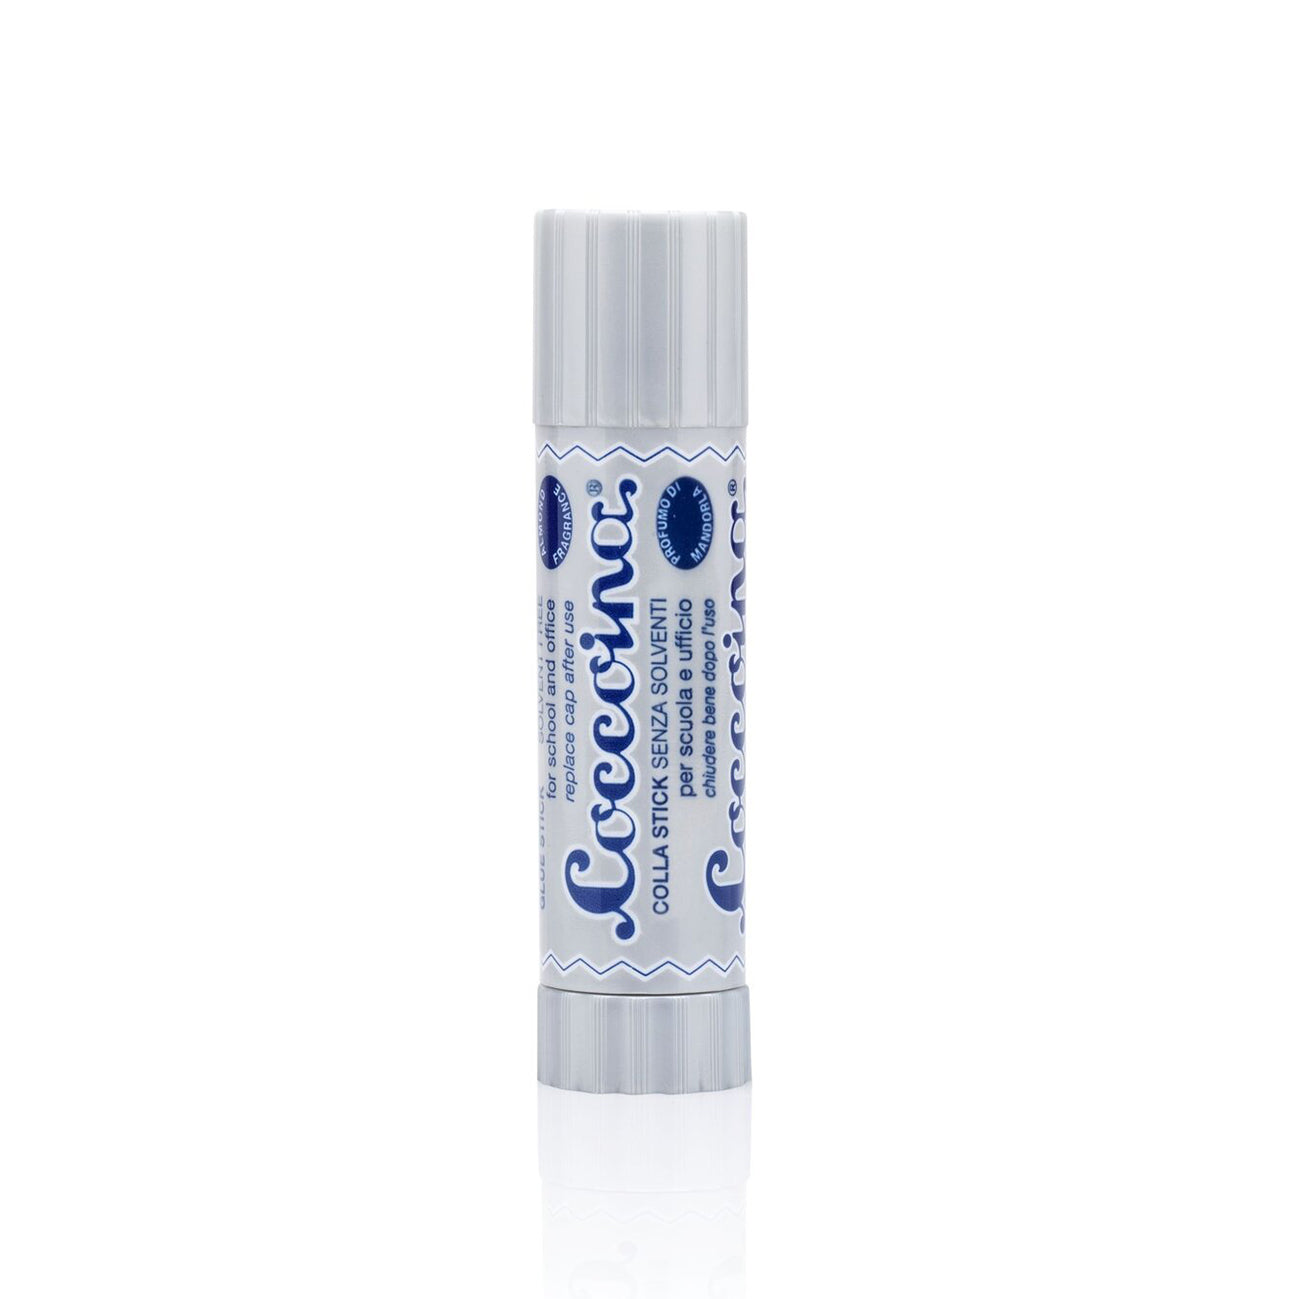 Coccoina Glue Stick - 40 gram - Made in Italy Almond Scent